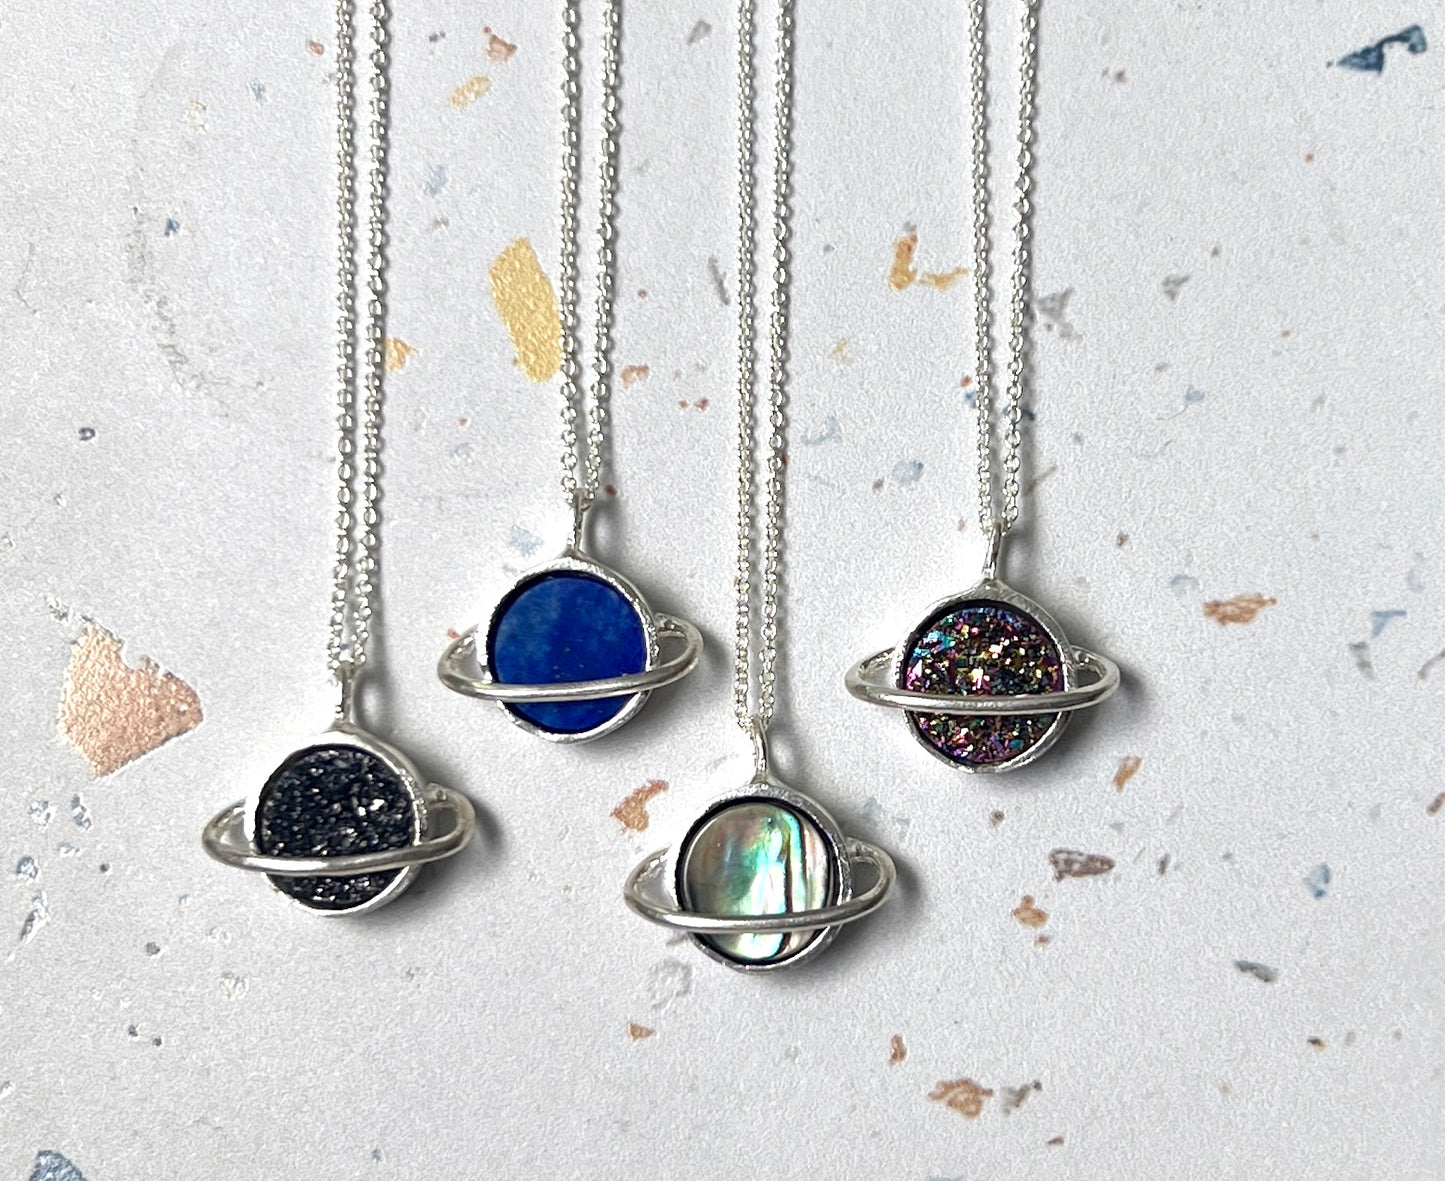 Stone or Druzy Saturn Pendants in Sterling Silver or 14k Gold Plate